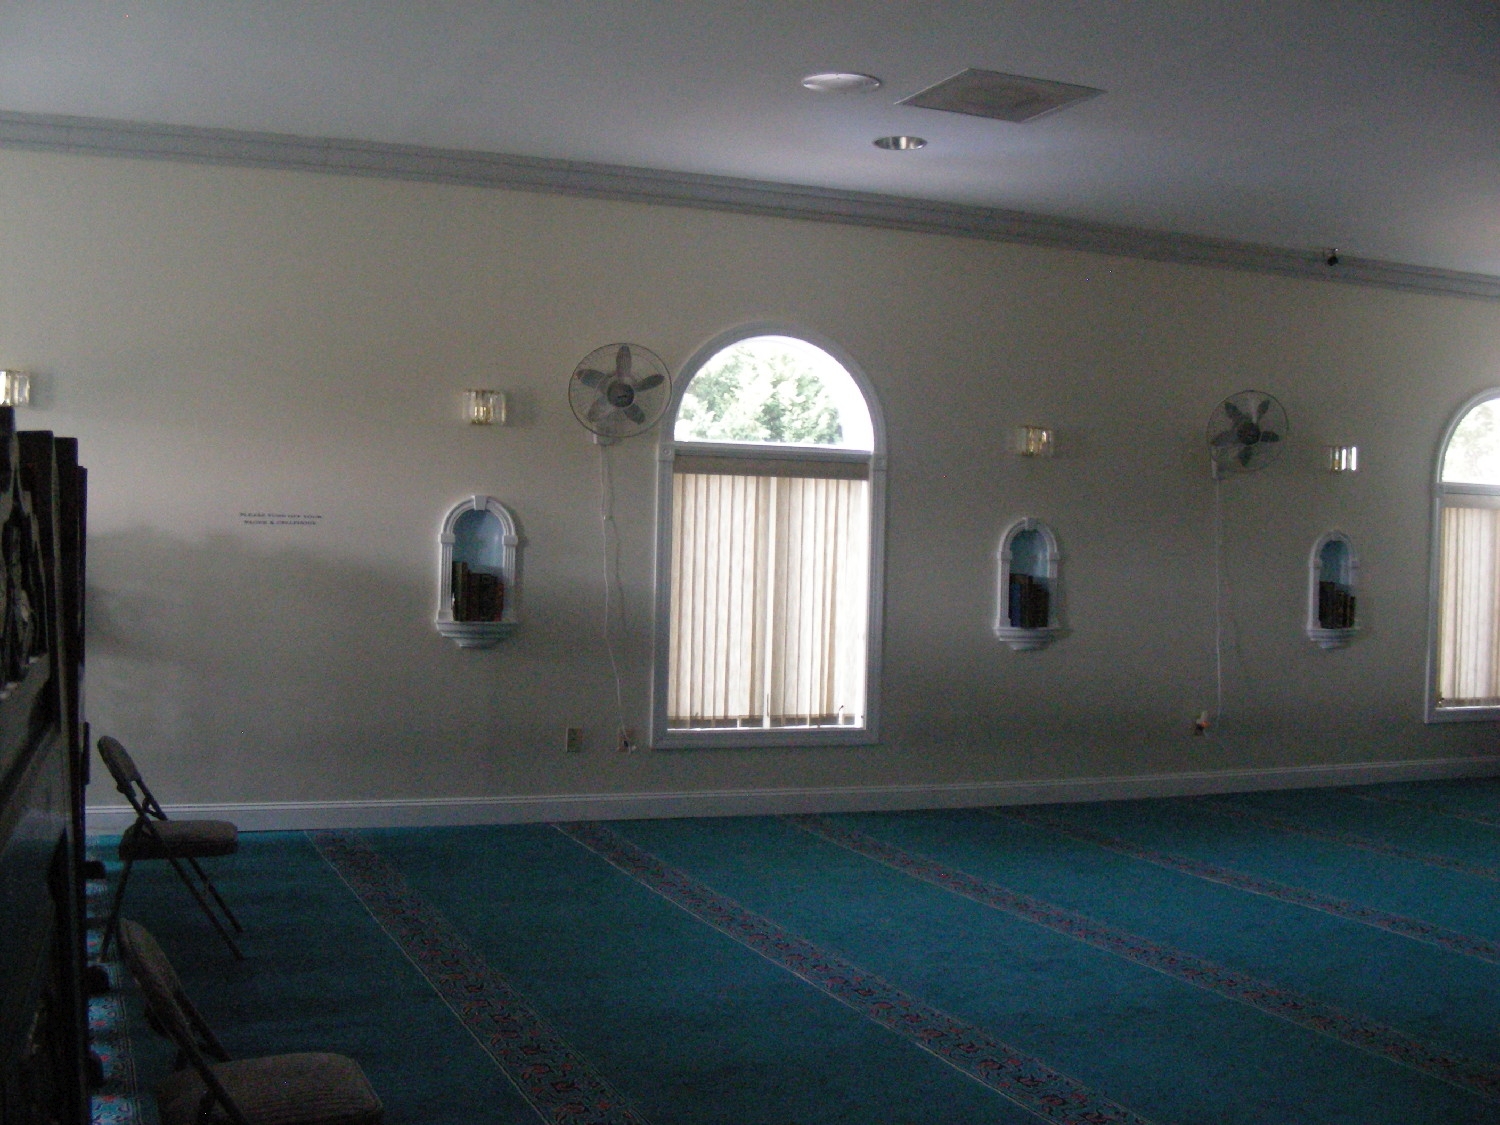 Prayer hall, detail of window and niches with books